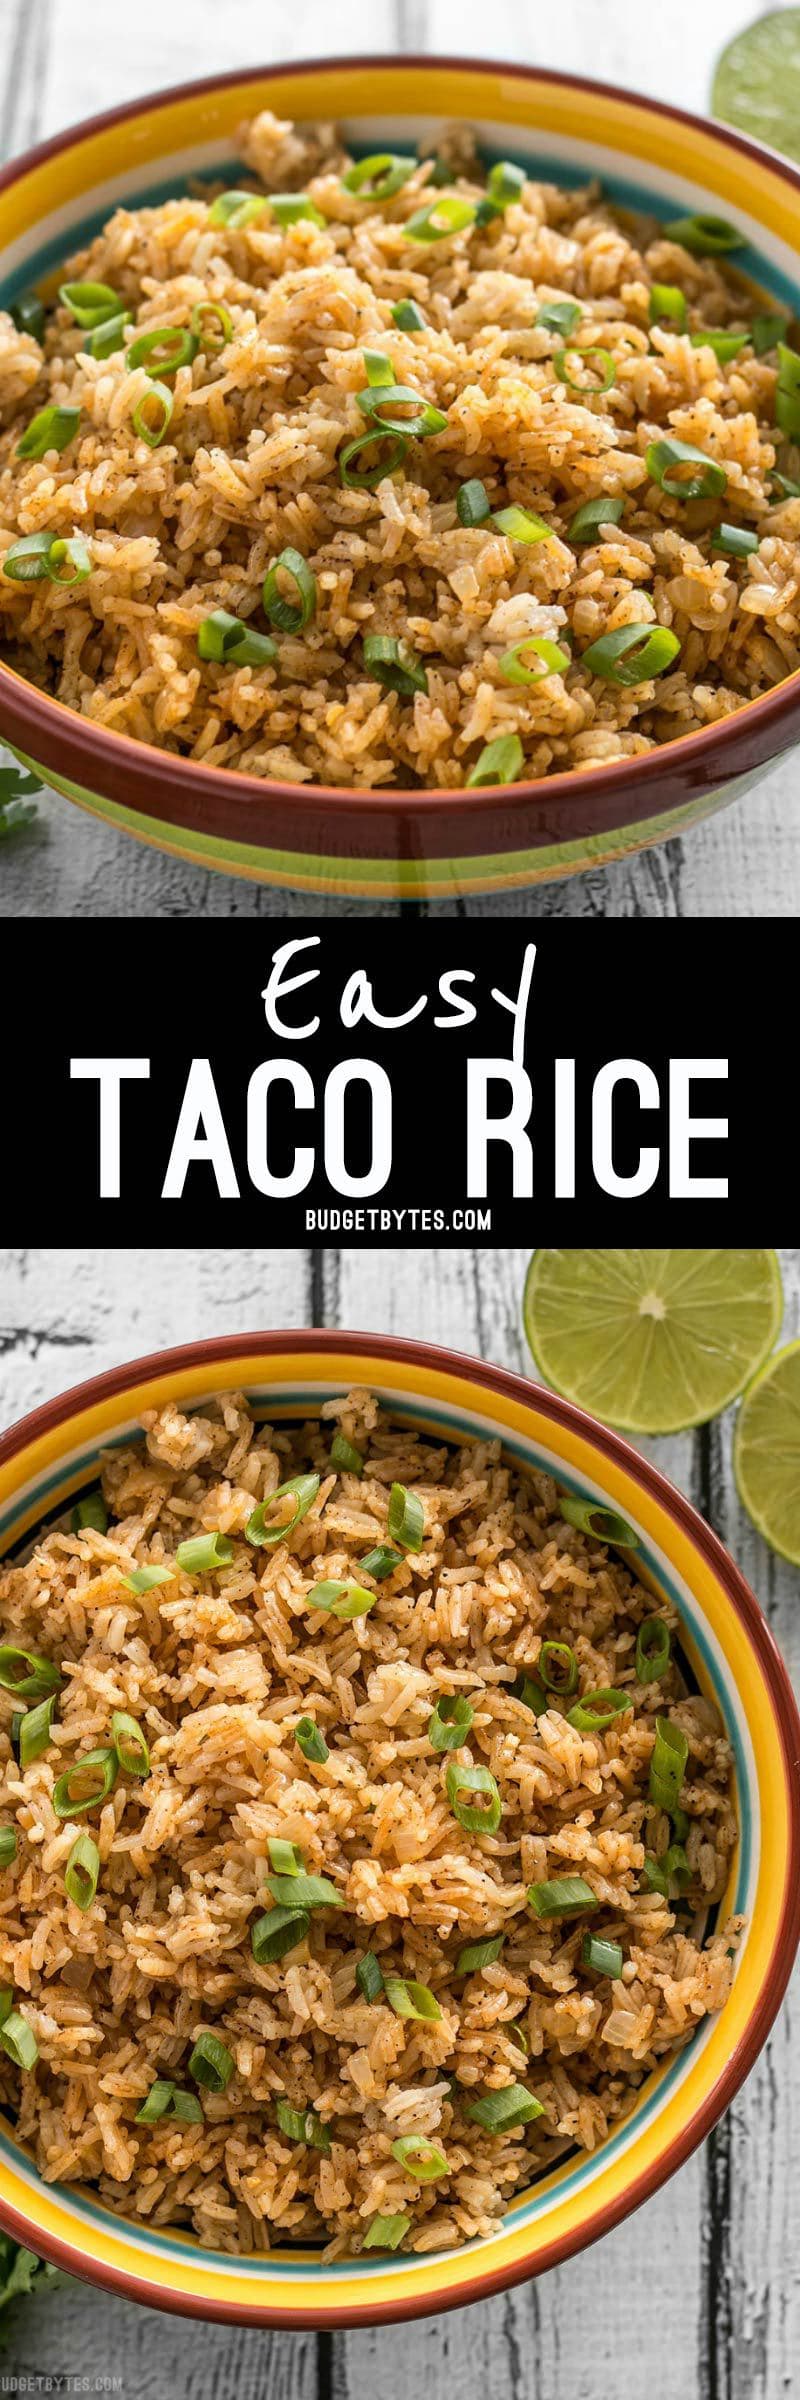 https://www.budgetbytes.com/wp-content/uploads/2017/07/Easy-Taco-Rice-Collage.jpg